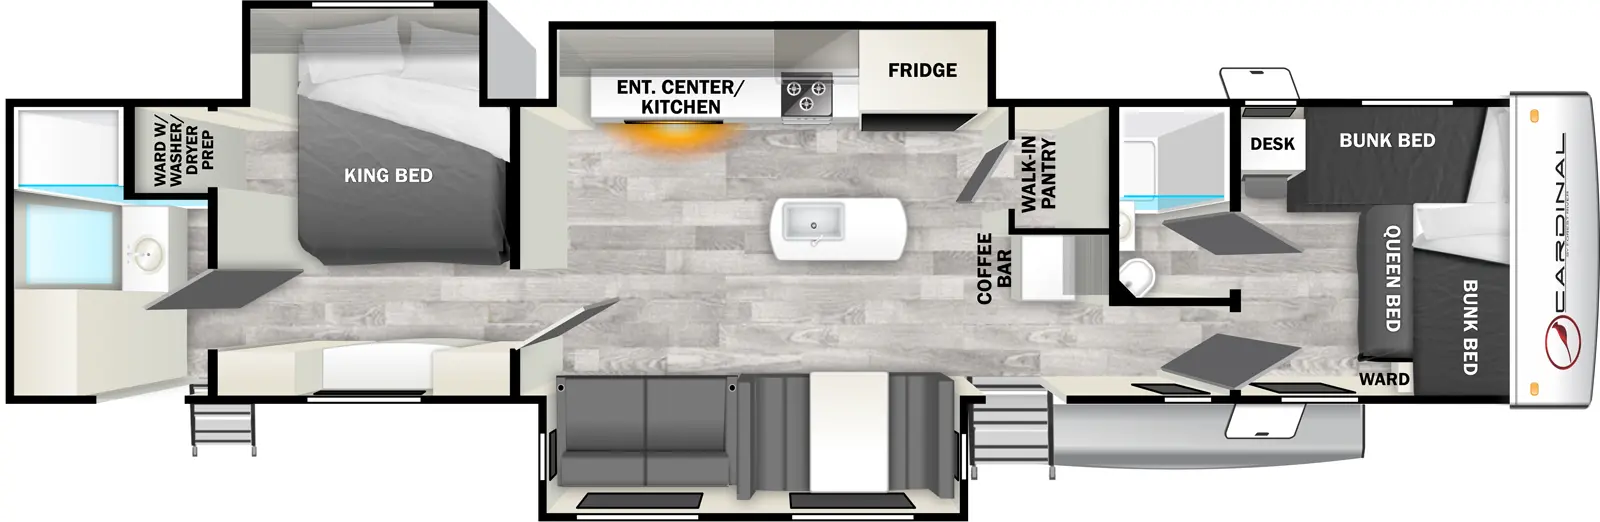 The 35FUN has three slideouts and two entries. Interior layout front to back: queen bed with bunk beds above on front and off-door side, wardrobe, desk, and full bathroom; coffee bar and walk-in pantry along inner wall; door side entry and slideout with dinette and sofa; off-door side slideout with refrigerator, kitchen counter with cooktop, and entertainment center; kitchen island with sink; mid bedroom with off-door side king bed slideout and loft above, and off-door side wardrobe with washer/dryer prep; rear full bathroom with second entry.